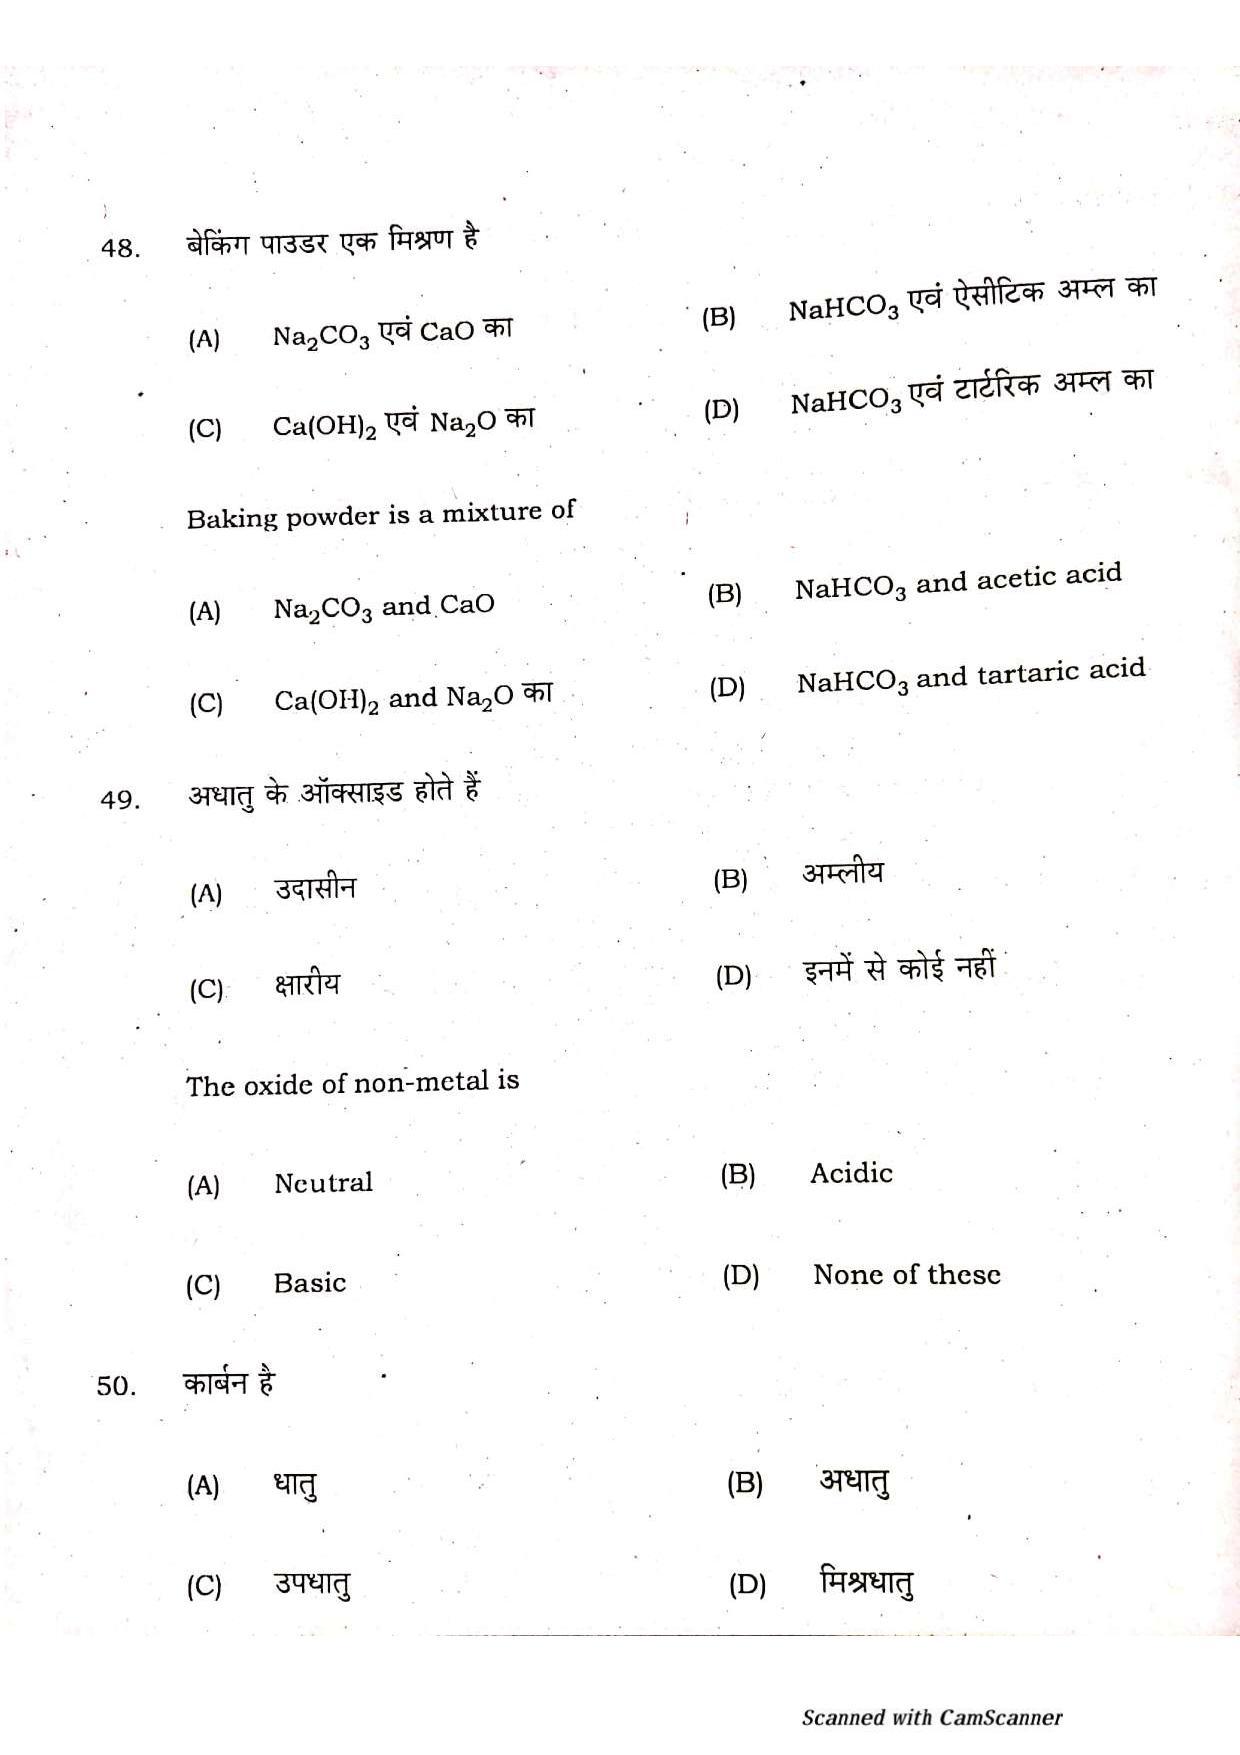 Bihar Board Class 10 Science 2021 (2nd Sitting) Question Paper - Page 22